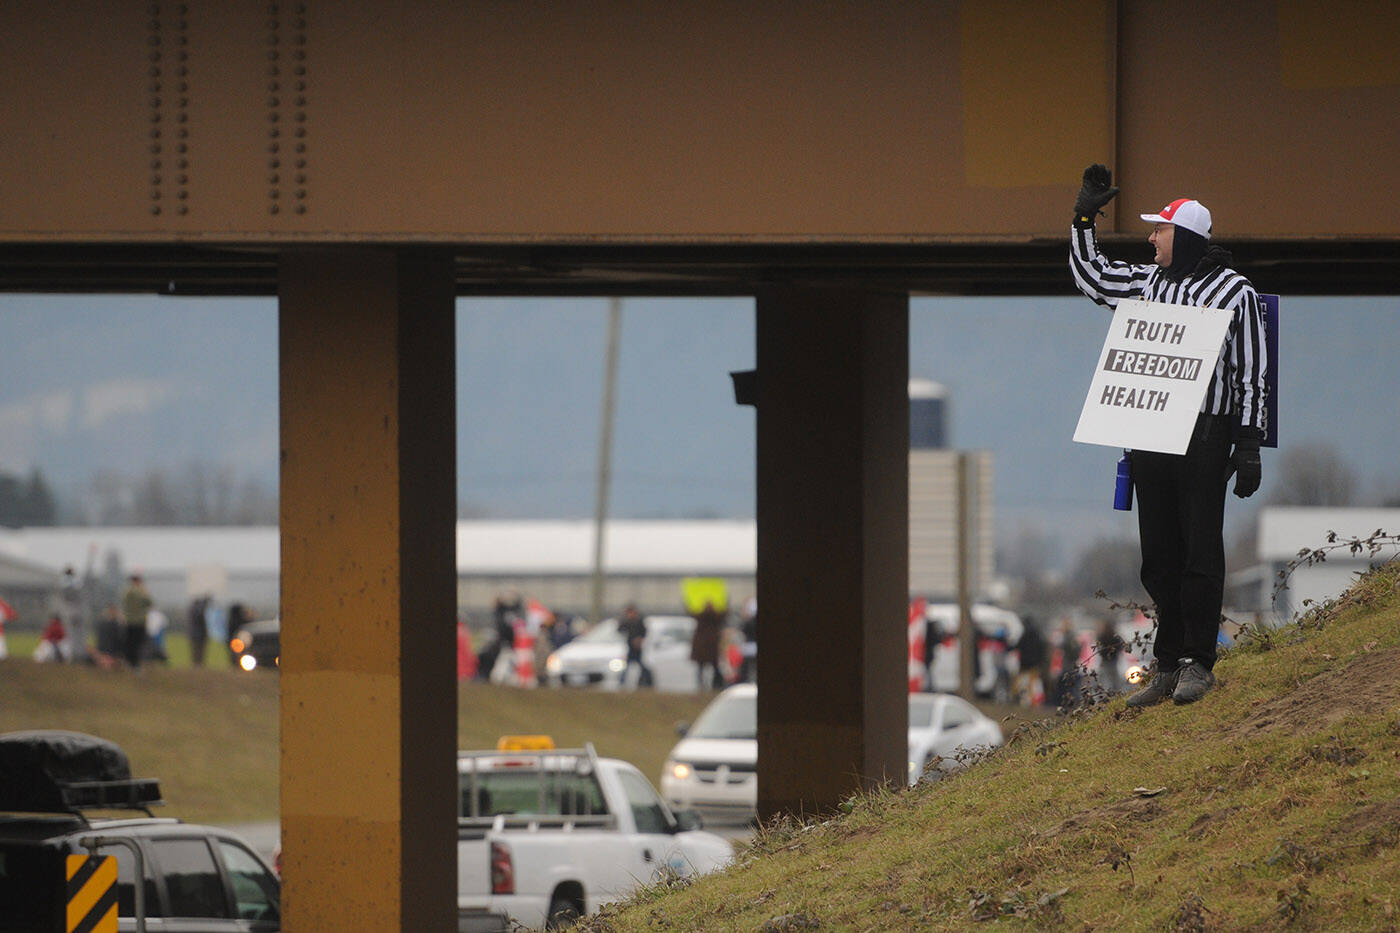 Hundreds of people were at the Lickman Road overpass in Chilliwack on Saturday, Jan. 29, 2022 in support of truckers protesting vaccine mandates. (Jenna Hauck/ Chilliwack Progress)